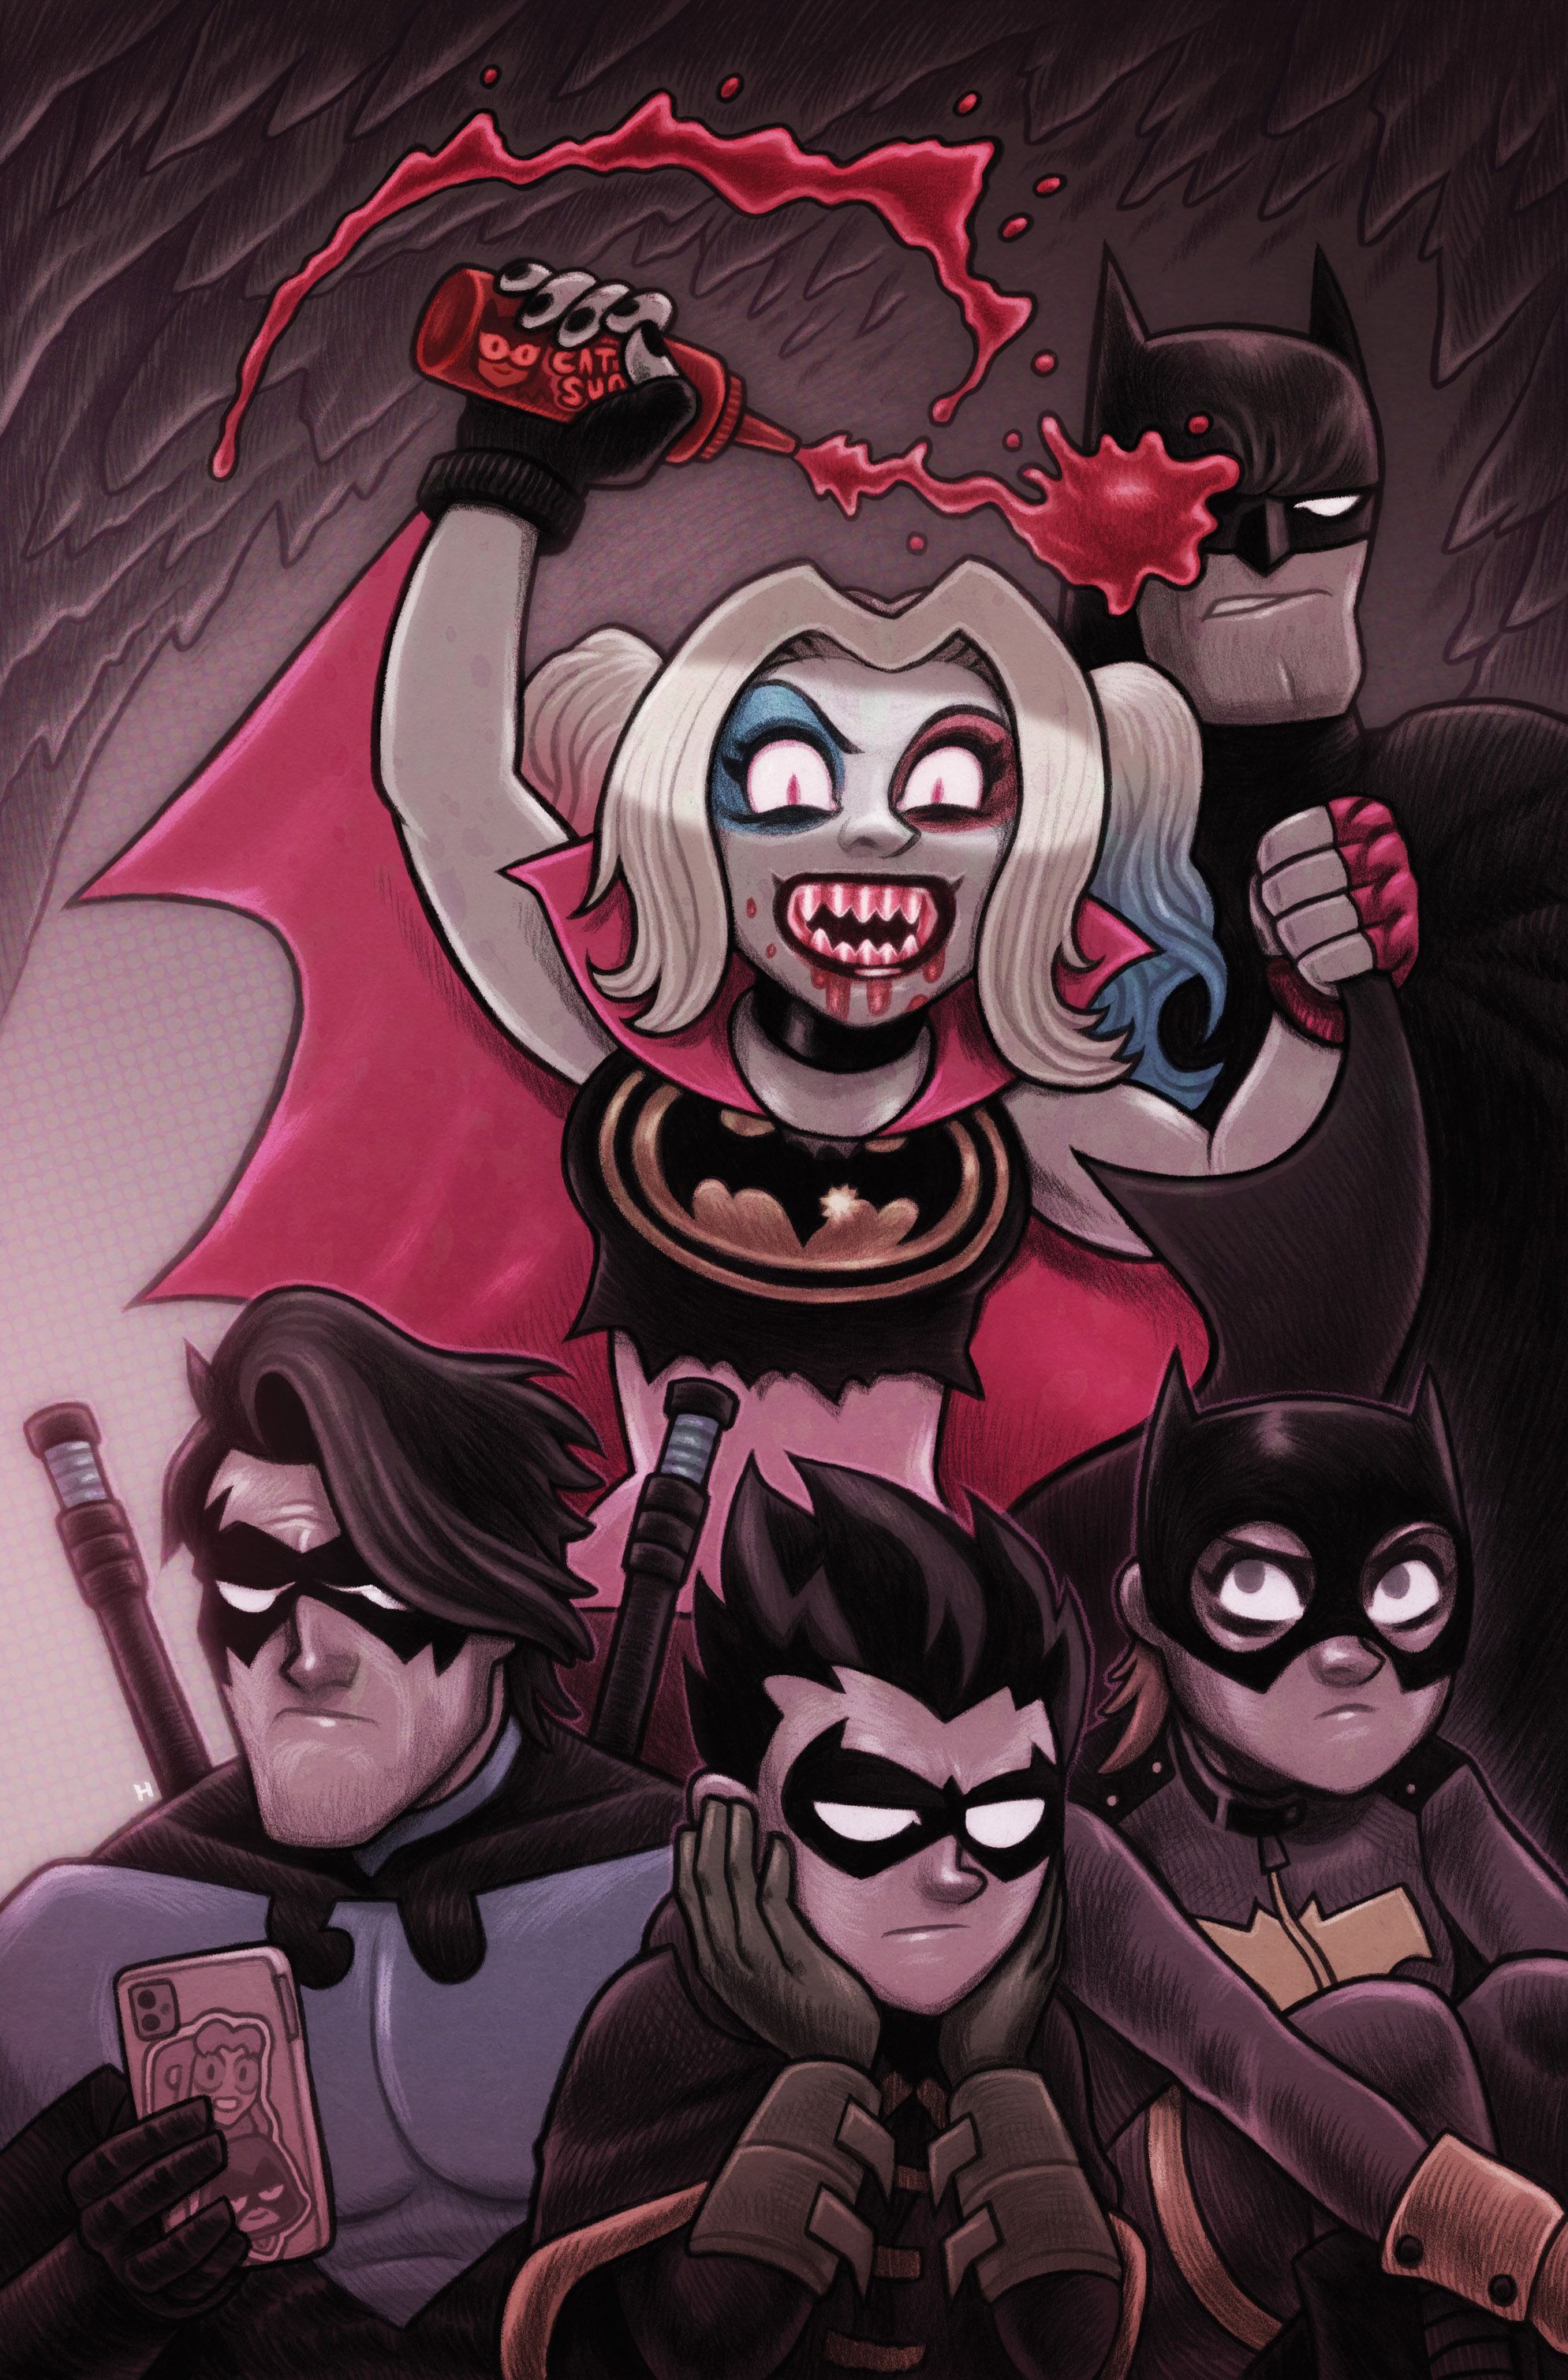 Harley Quinn The Animated Series Legion of Bats! 5 Open to Order Variant